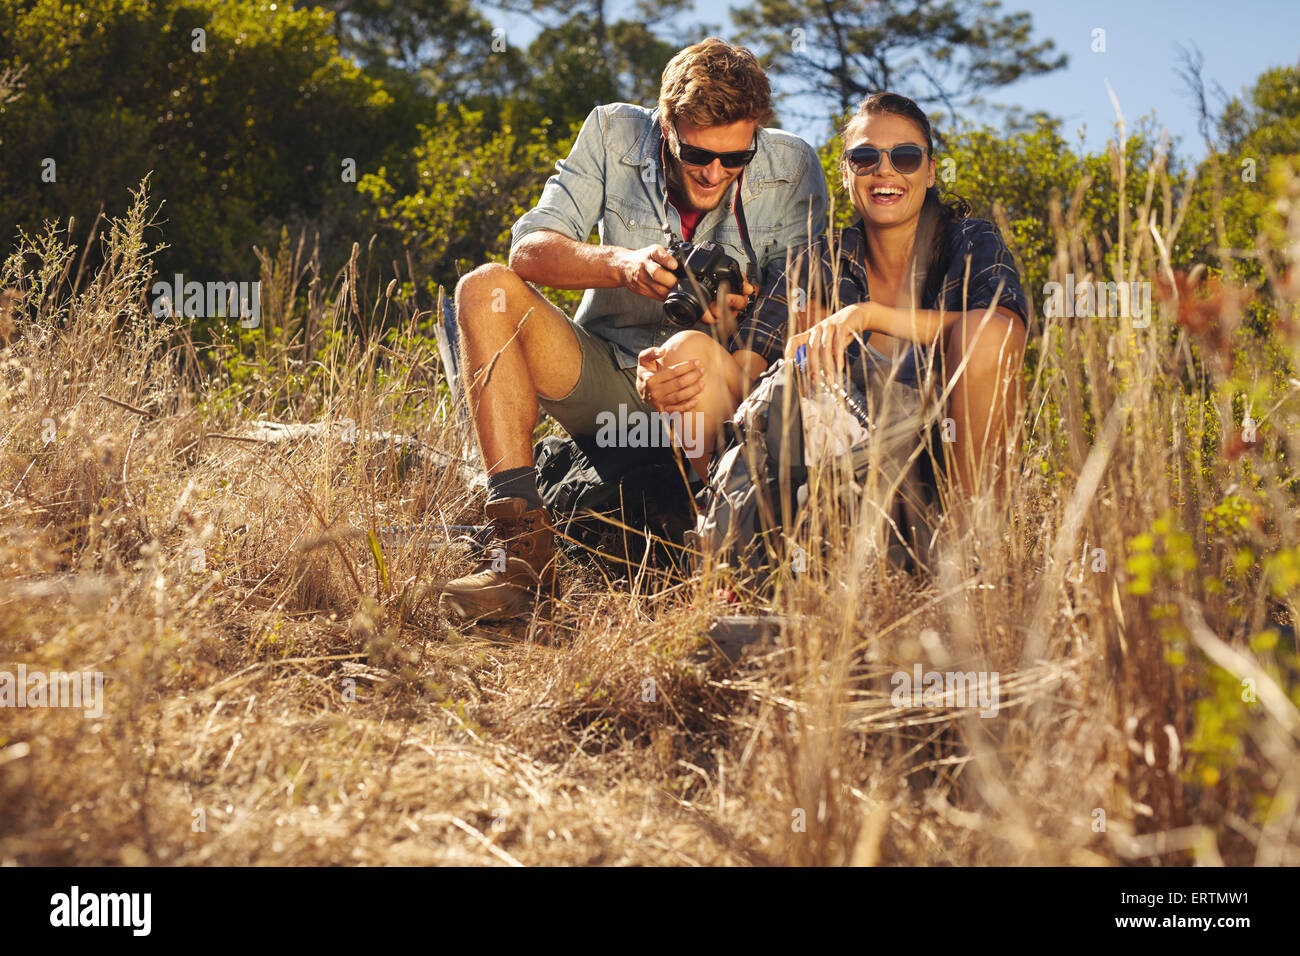 Outdoor shot of young couple on hiking trip taking a break. Woman smiling while man looking at his camera. Stock Photo